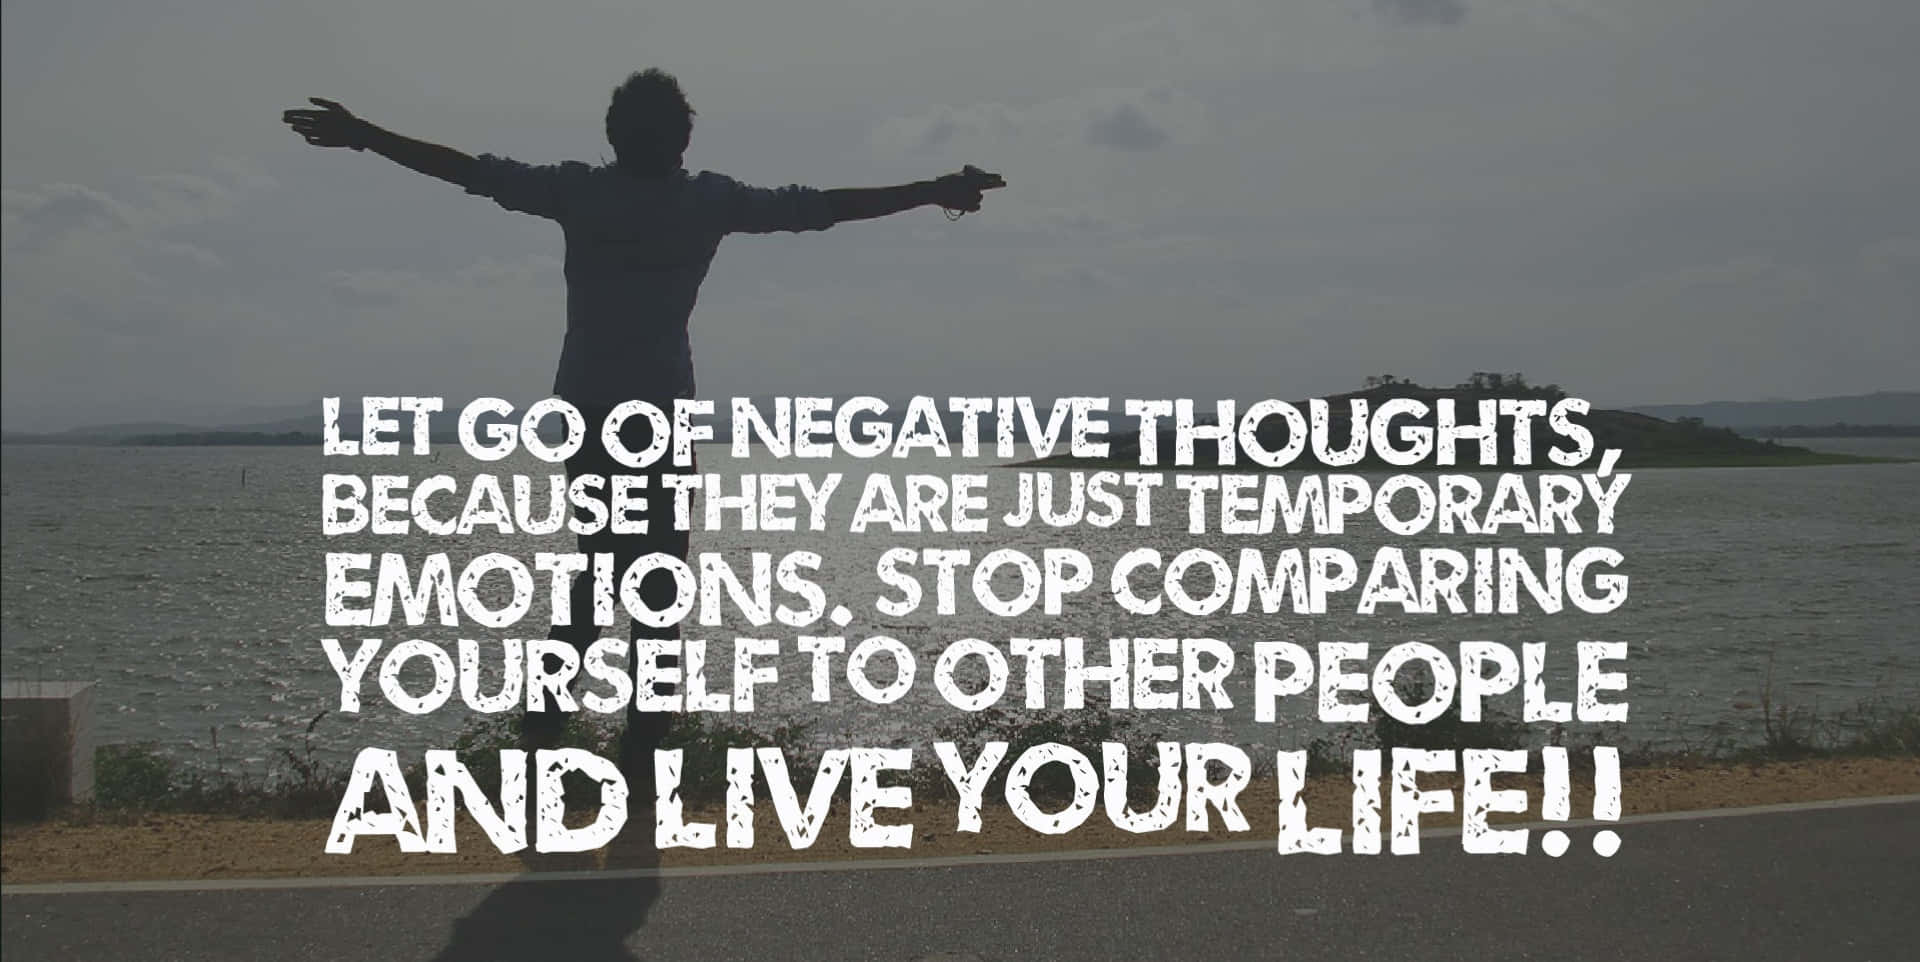 Let Negative Thoughts Go Because Emotions Are Just Comparing Stop People And Live Your Life